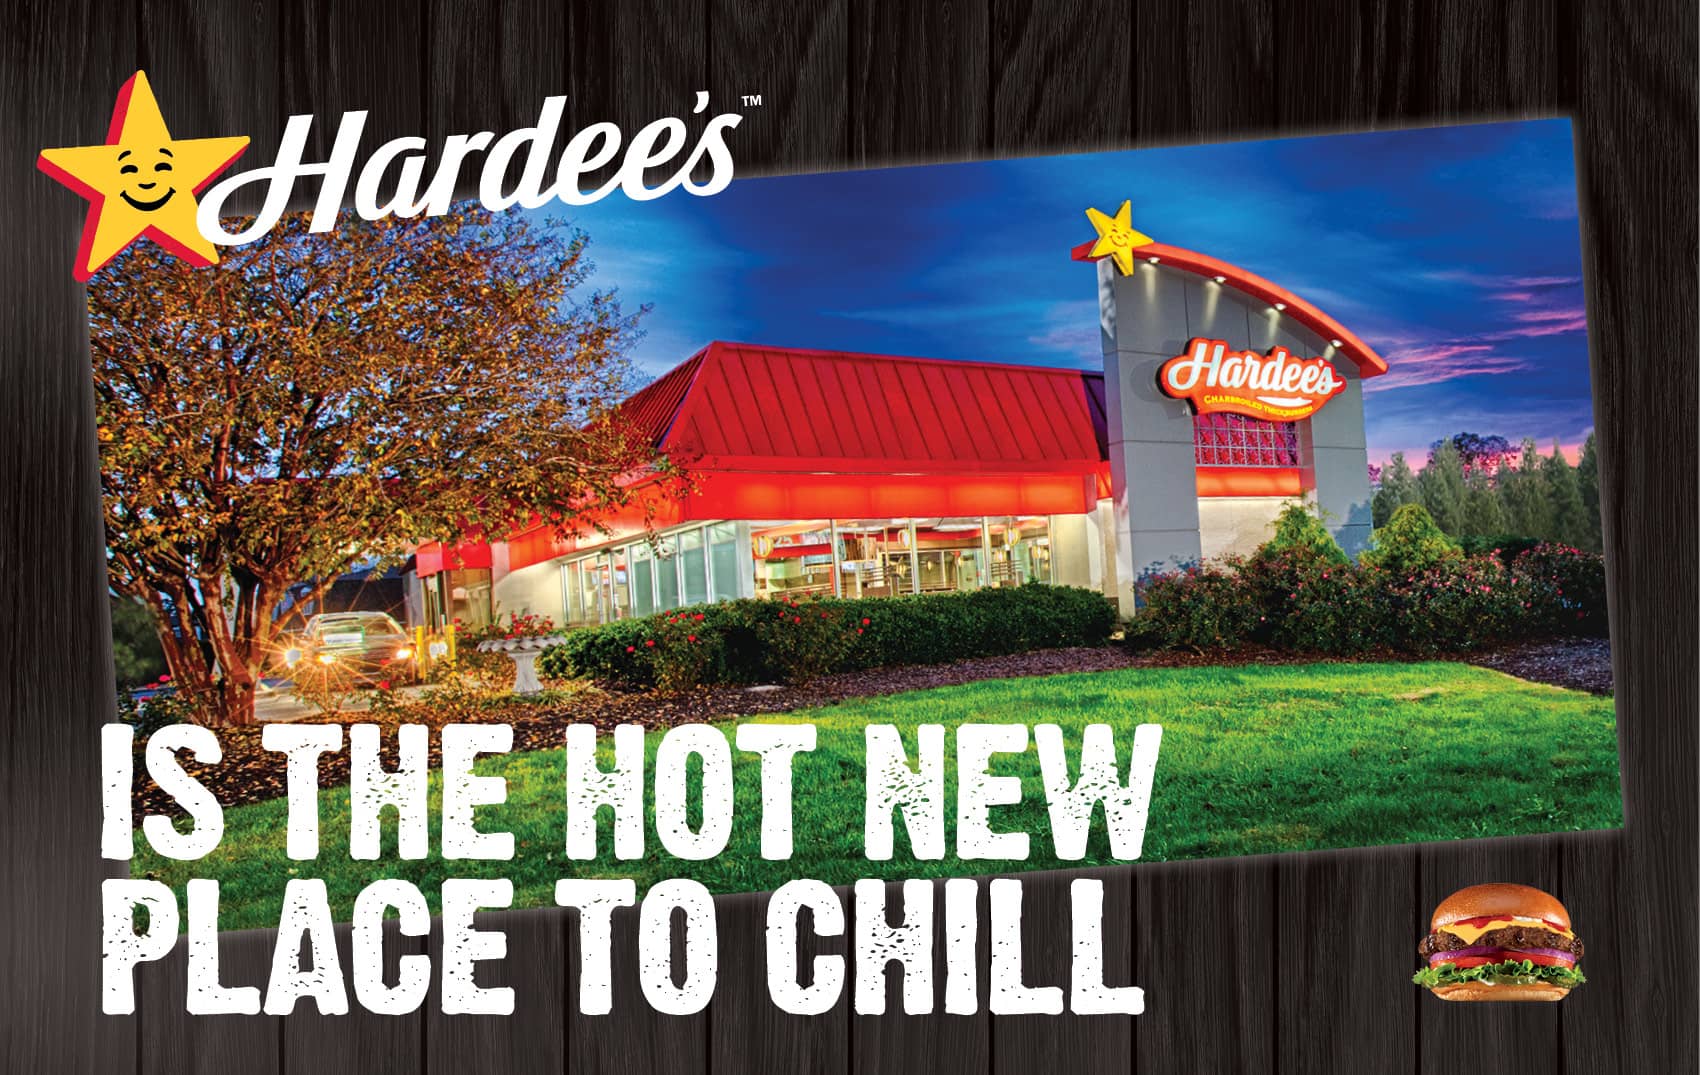 hardees restaurant sitting on a hill